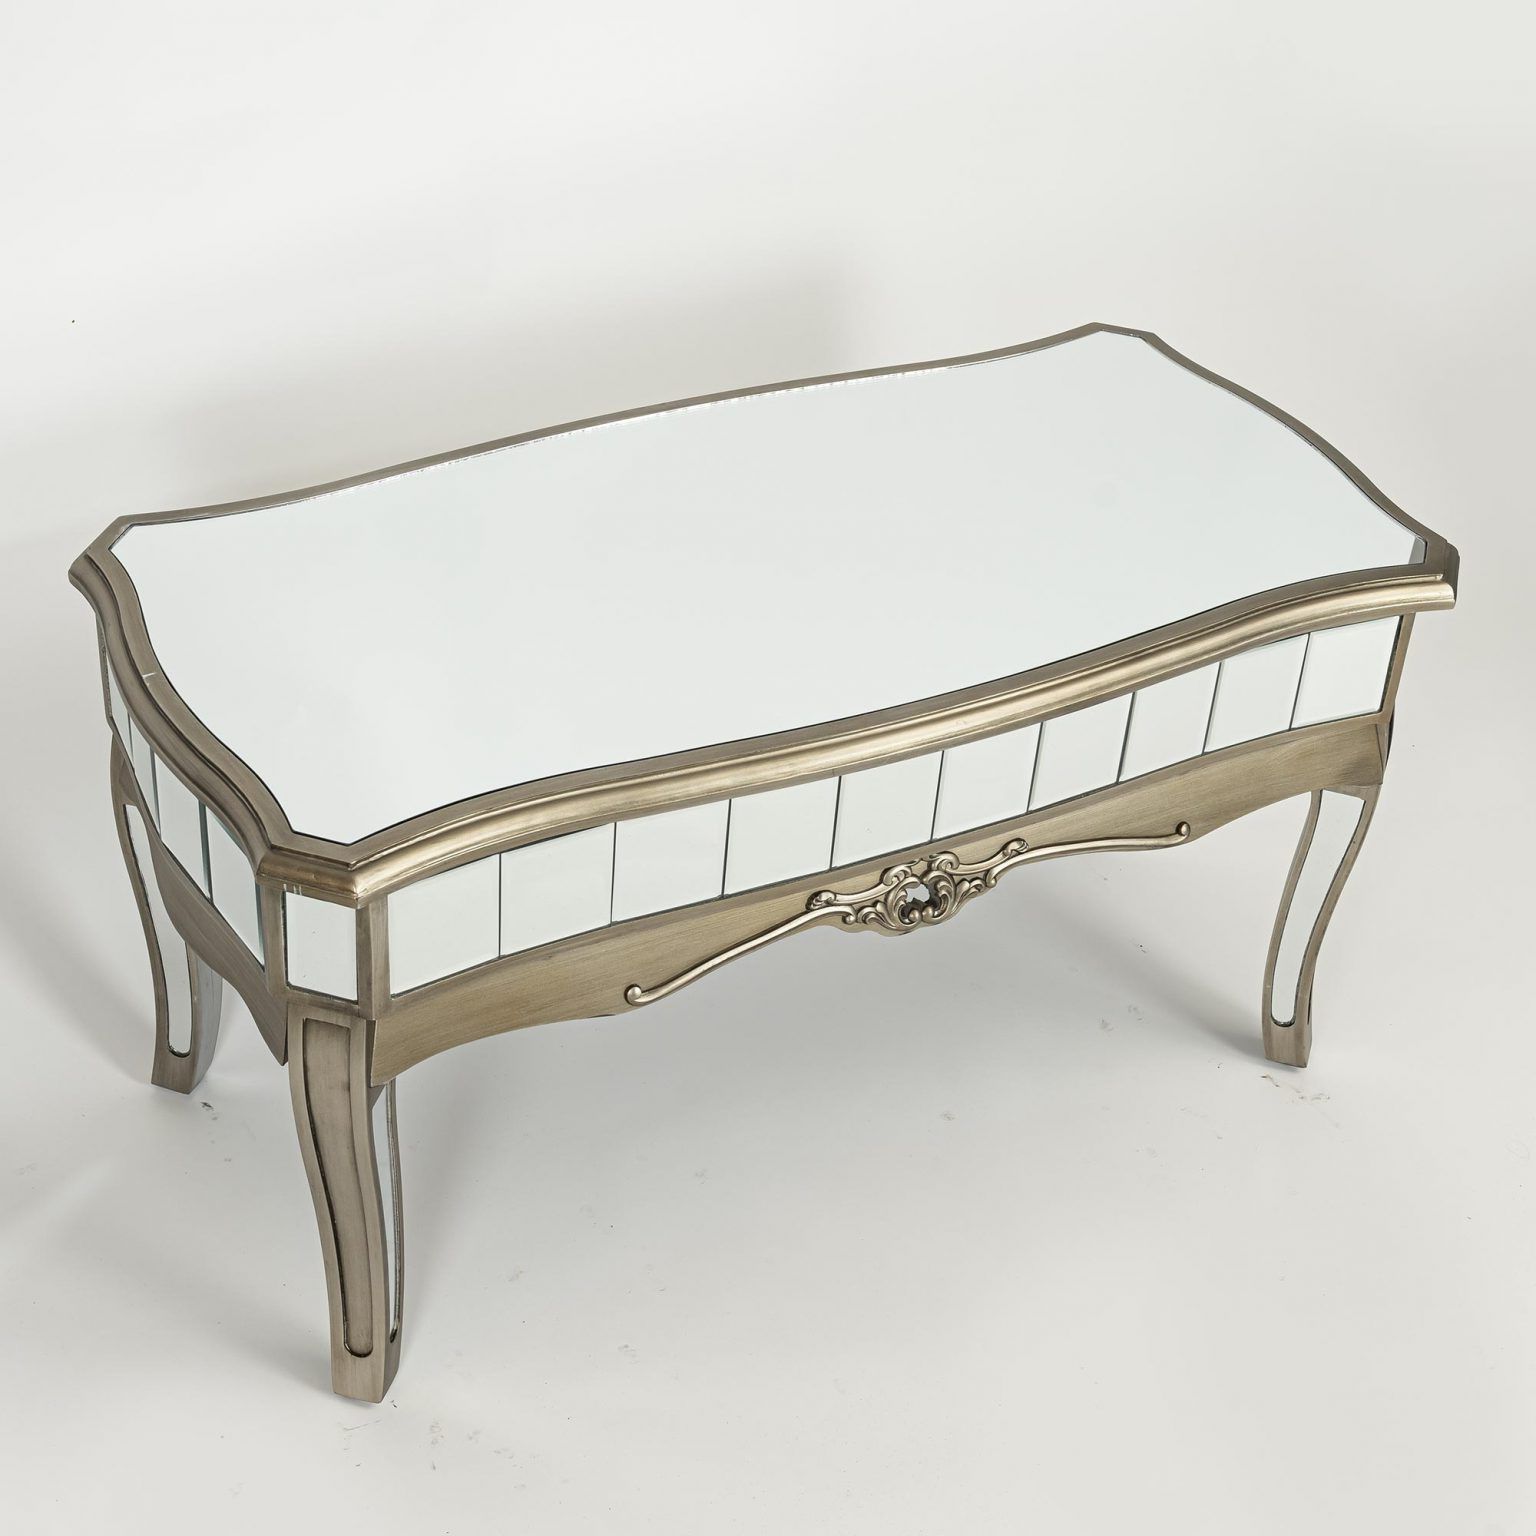 Annabelle Mirrored Coffee Table – Antique Silver – Sparkle Within Widely Used Antique Silver Metal Coffee Tables (View 6 of 20)